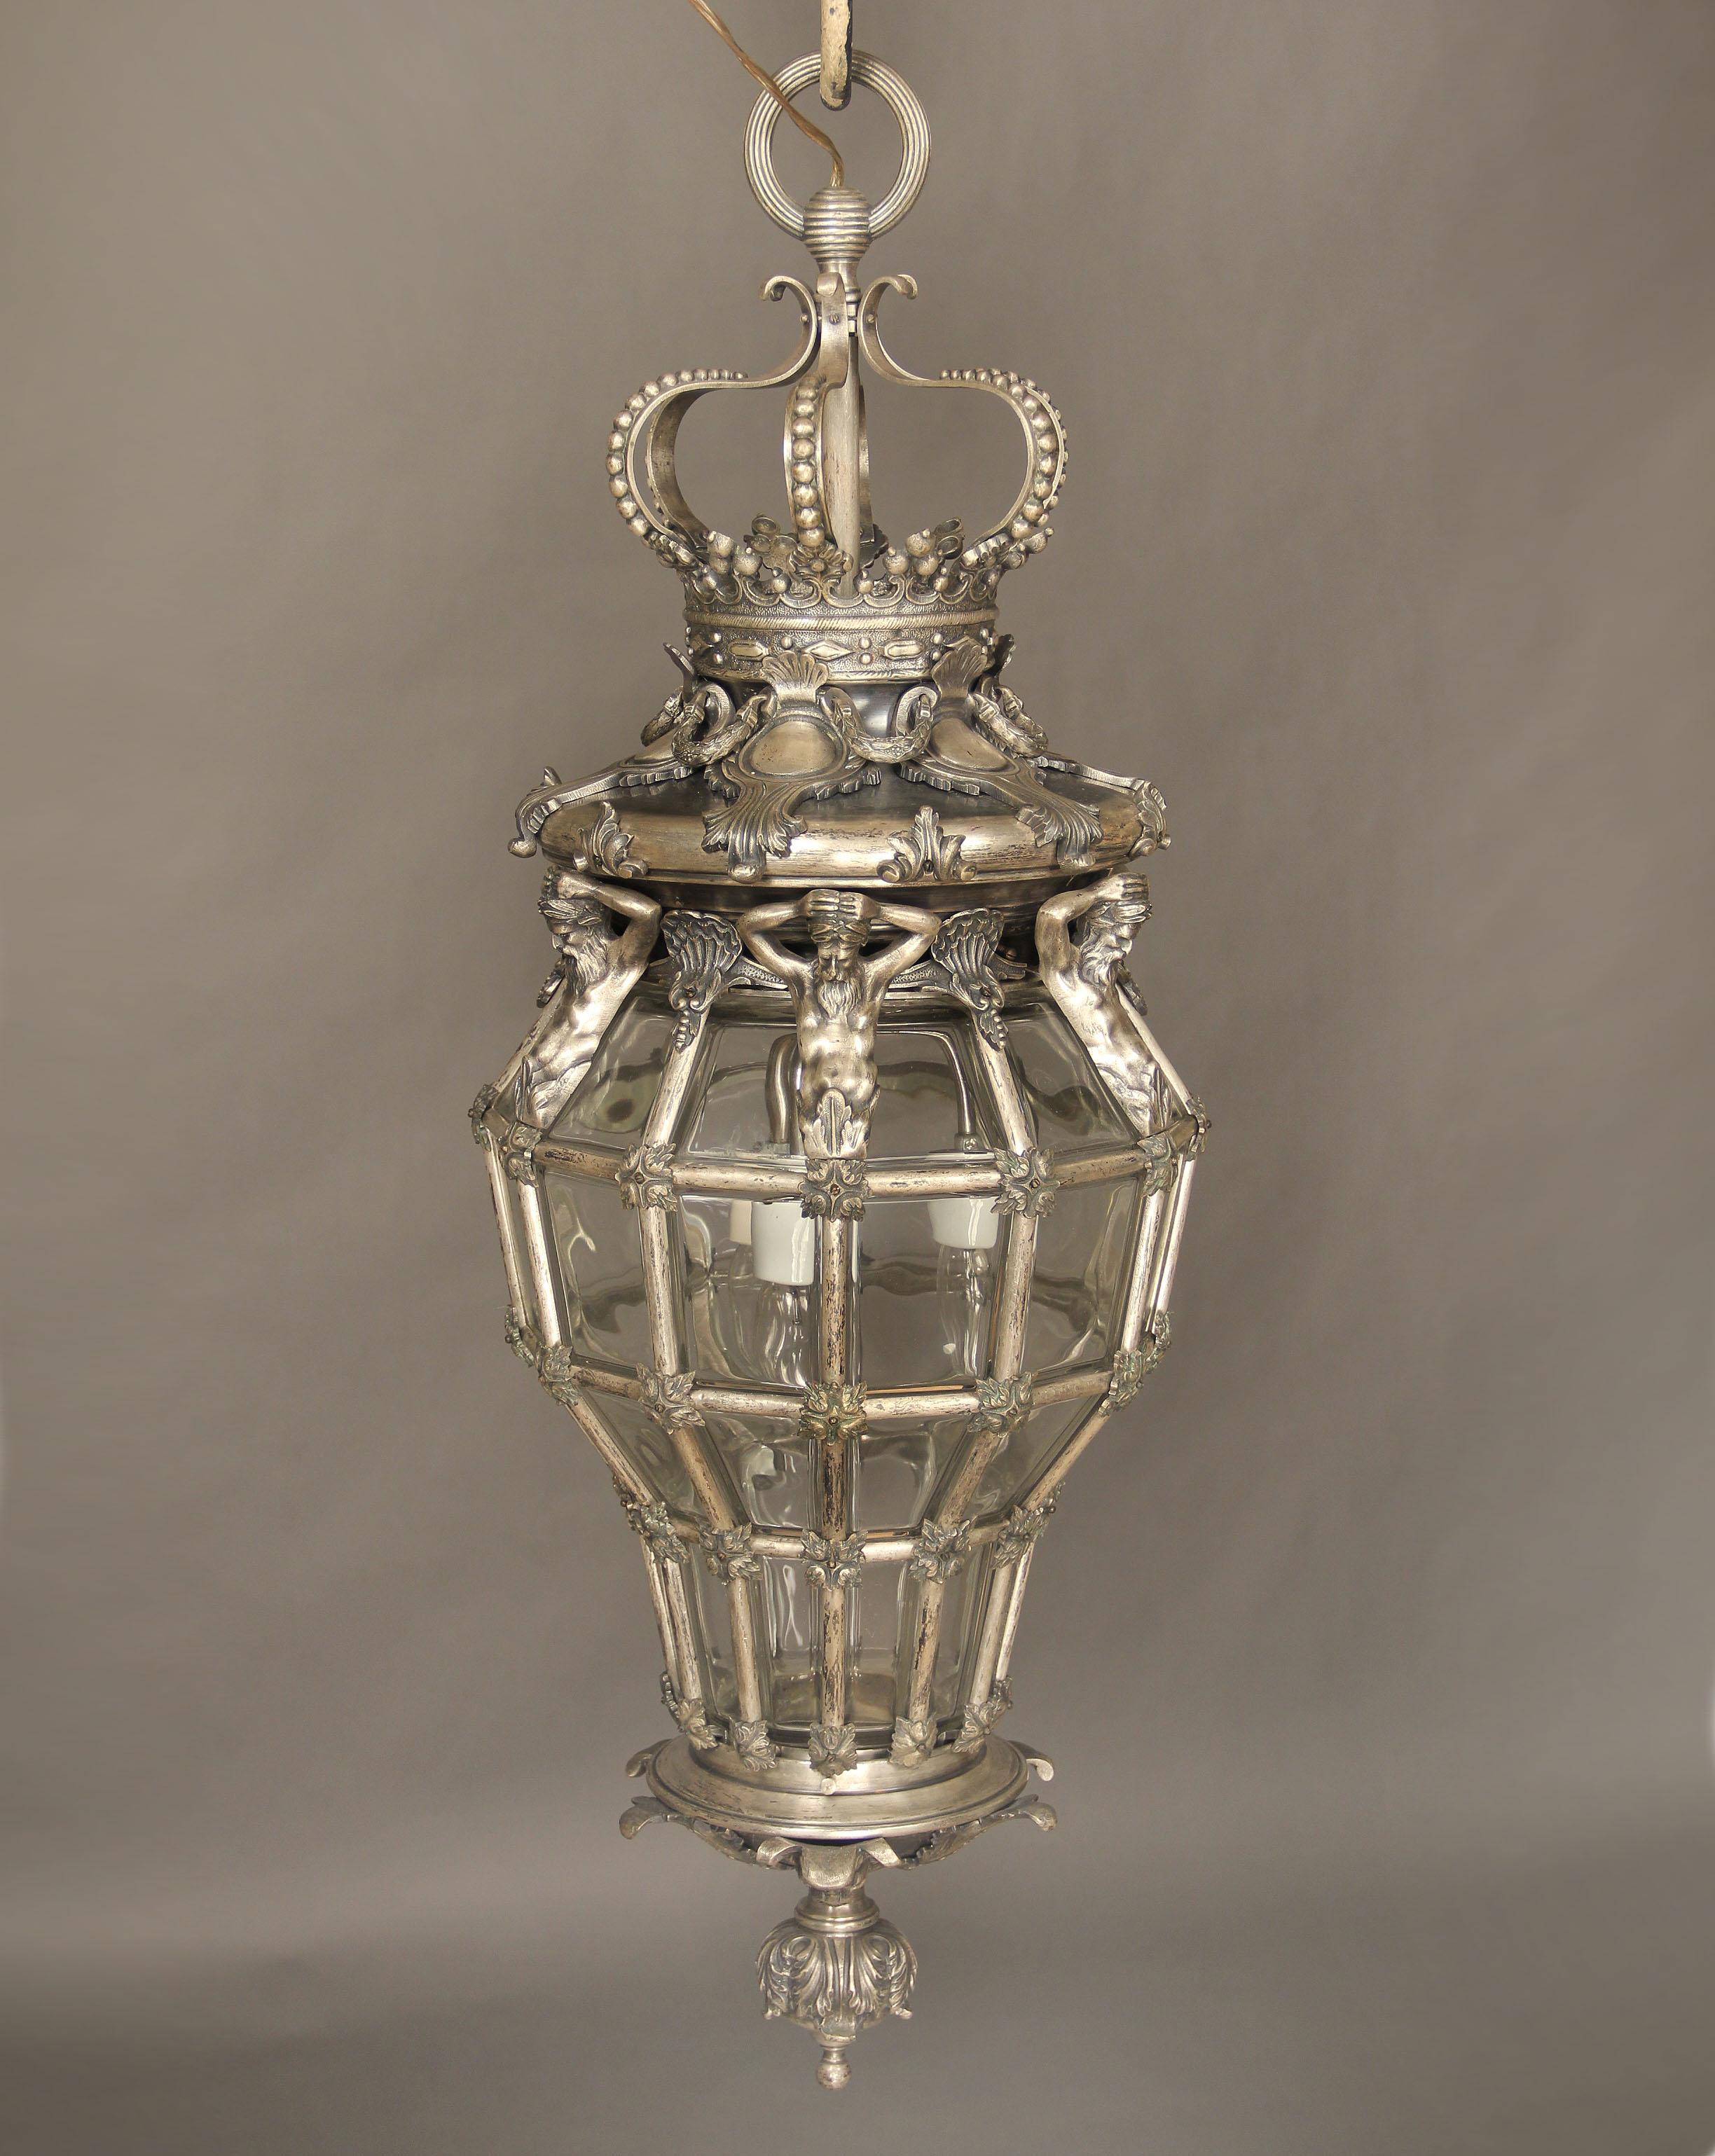 A fine late 19th century silver gilt and glass ‘Versailles’ hall lantern

After the Versailles model, of octagonal and cage form, with a corona finial above four Neptune figures and scallop shells, the base with lion masks. Three interior lights.